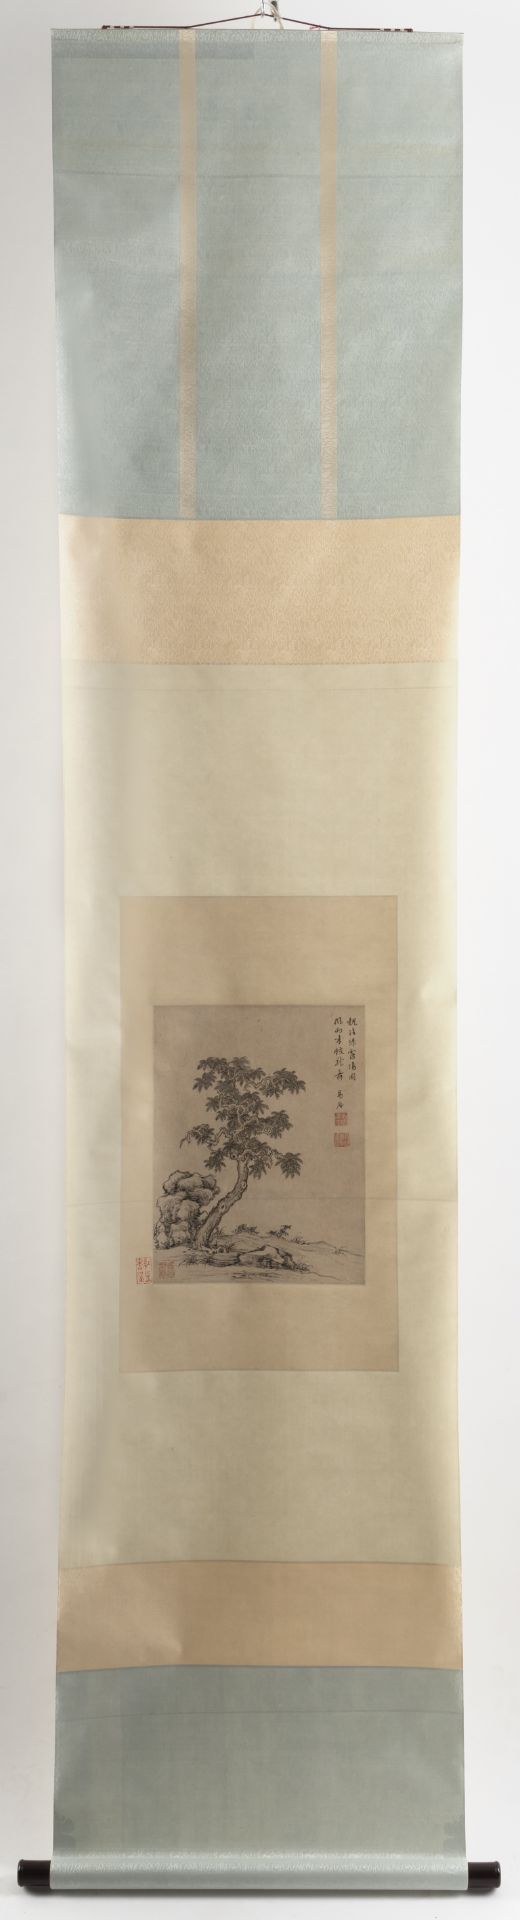 IN THE STYLE OF XIANG SHENGMO (1597-1658): SCHOLAR TREE AND STONE - Image 4 of 4